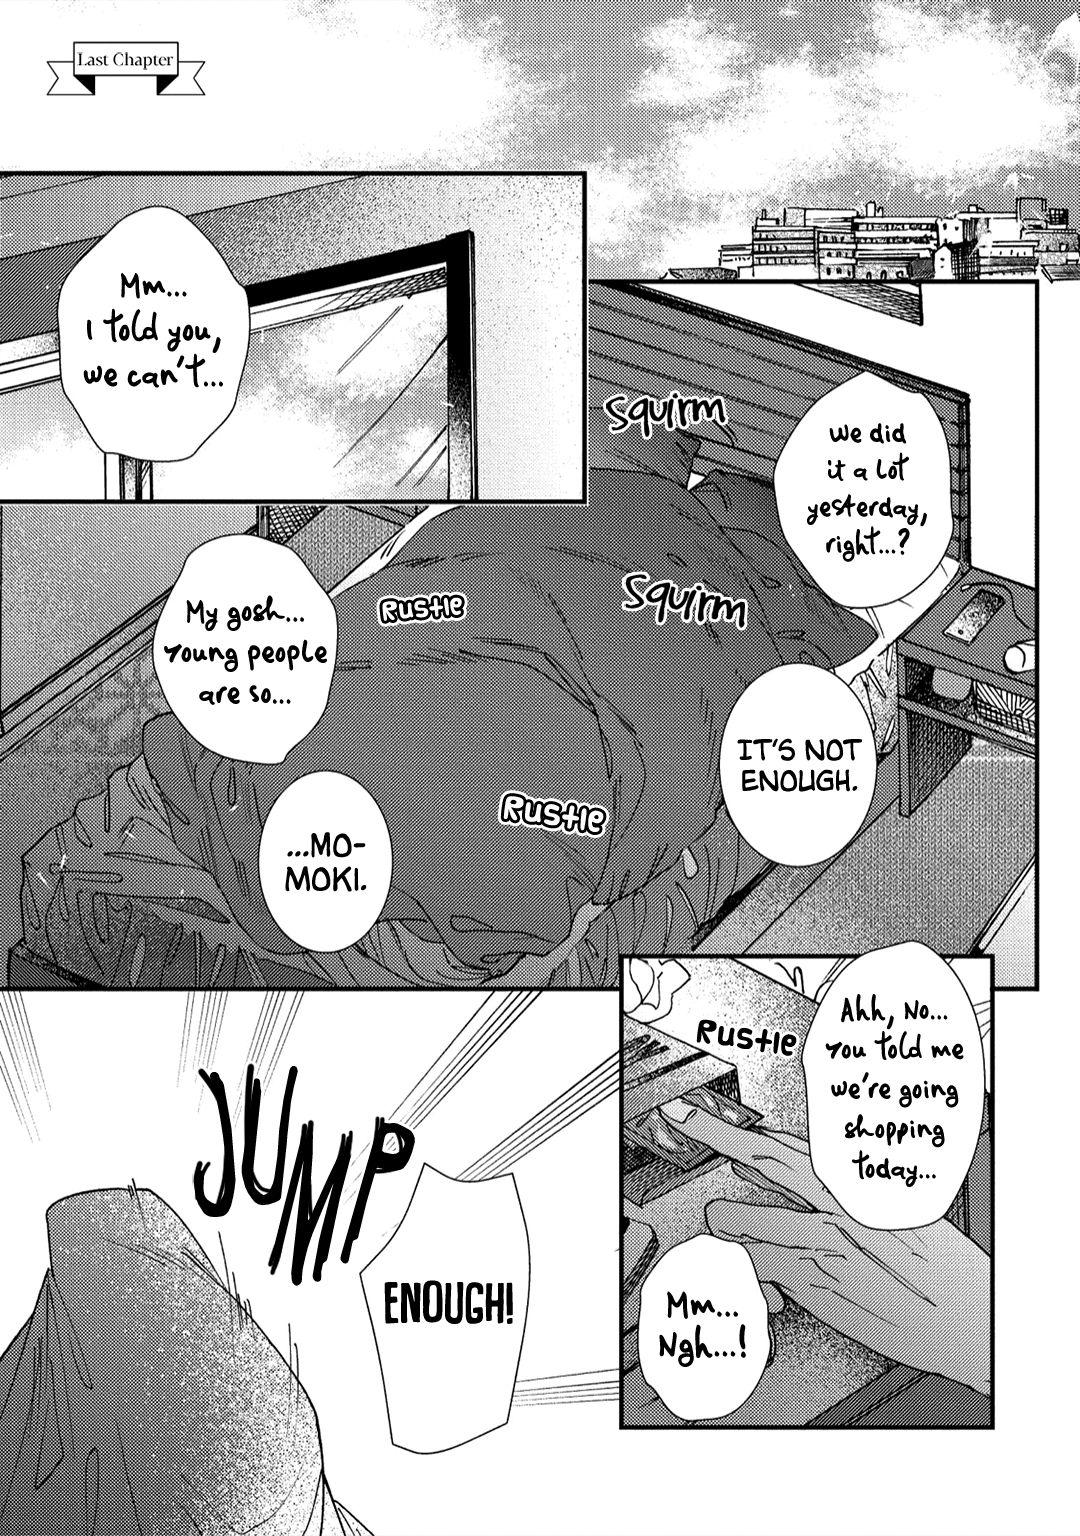 Muri Marriage - Page 2